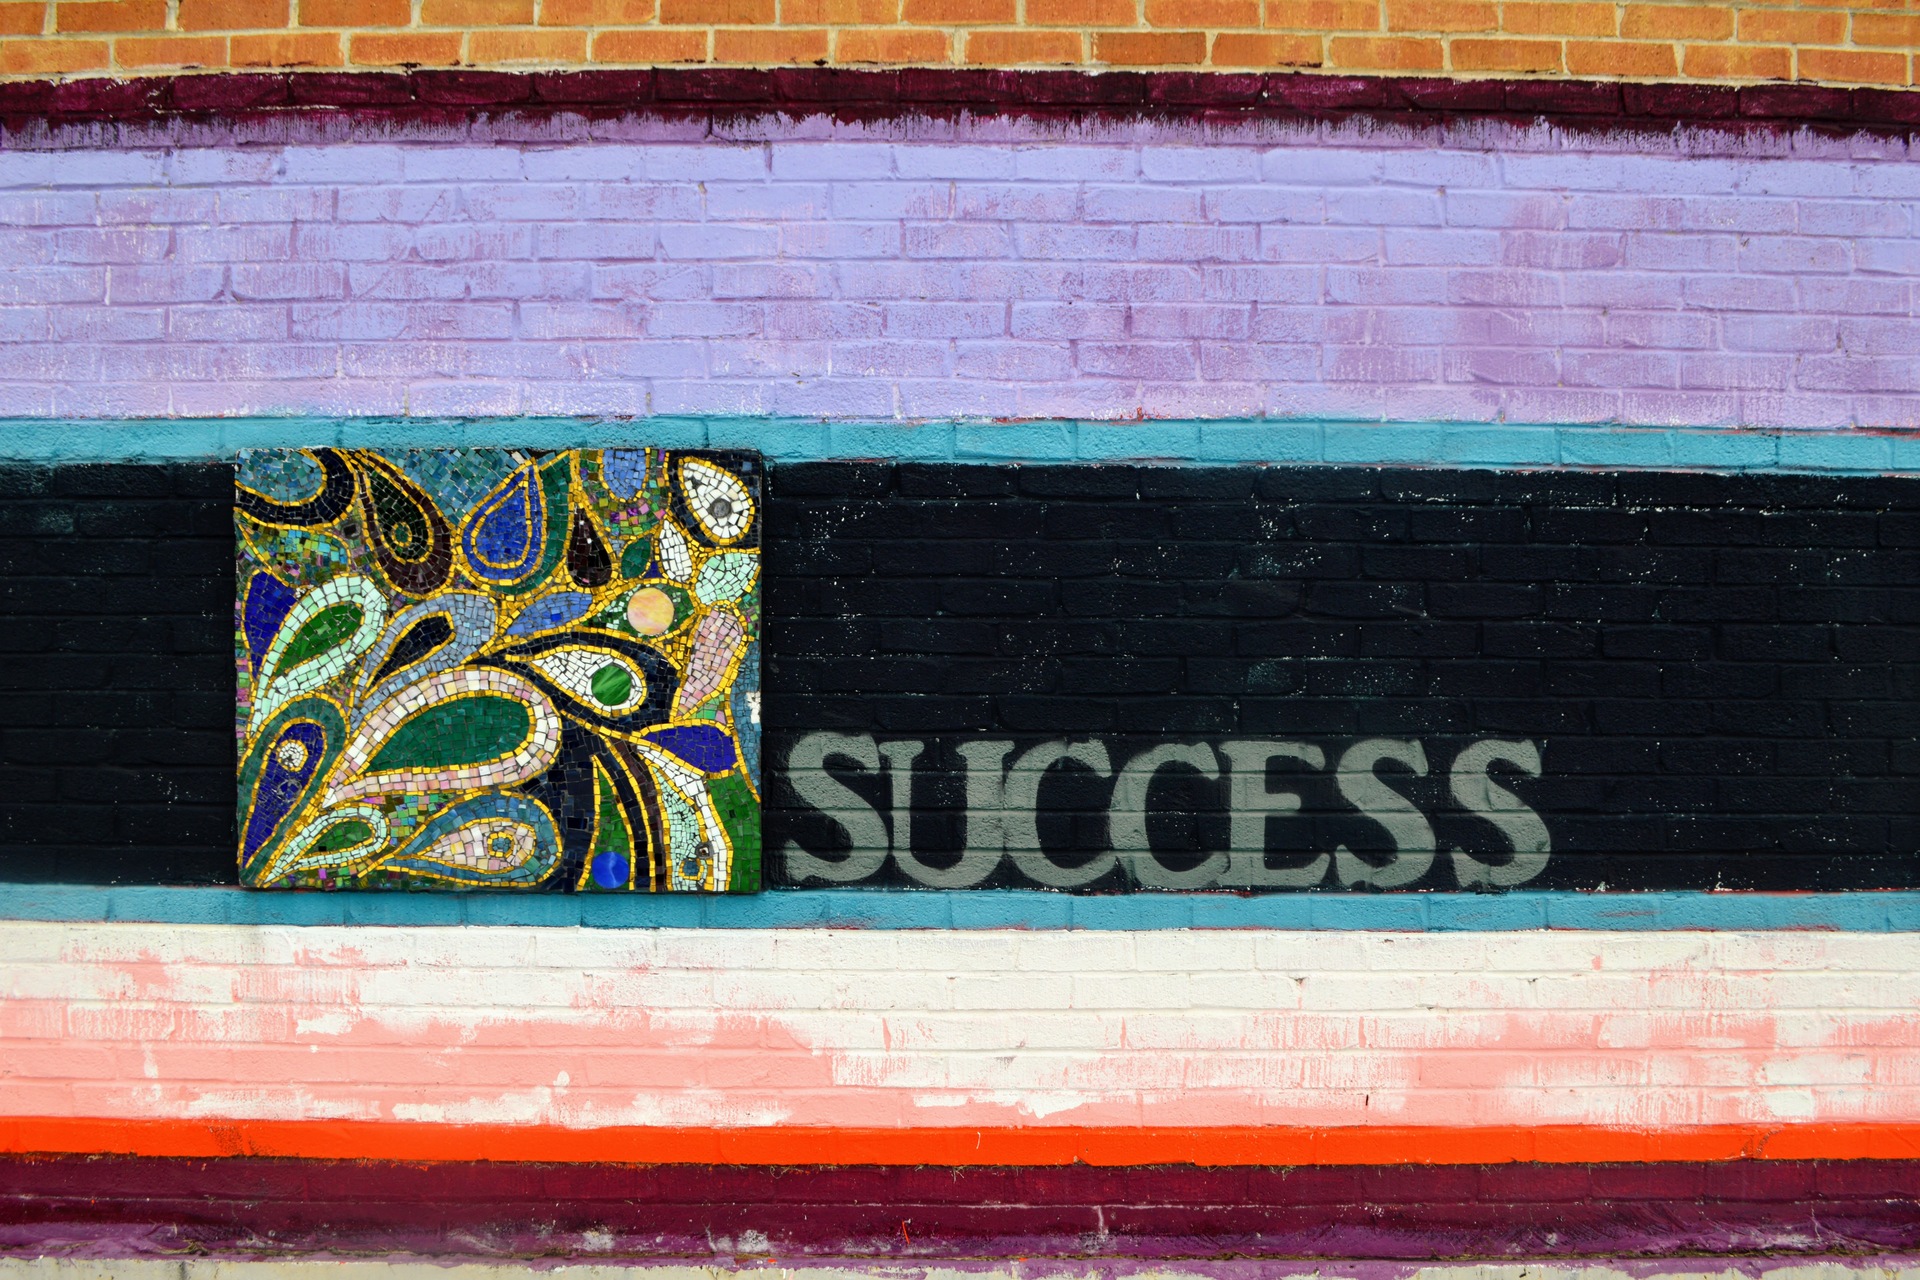 A mural with word "success" in all caps